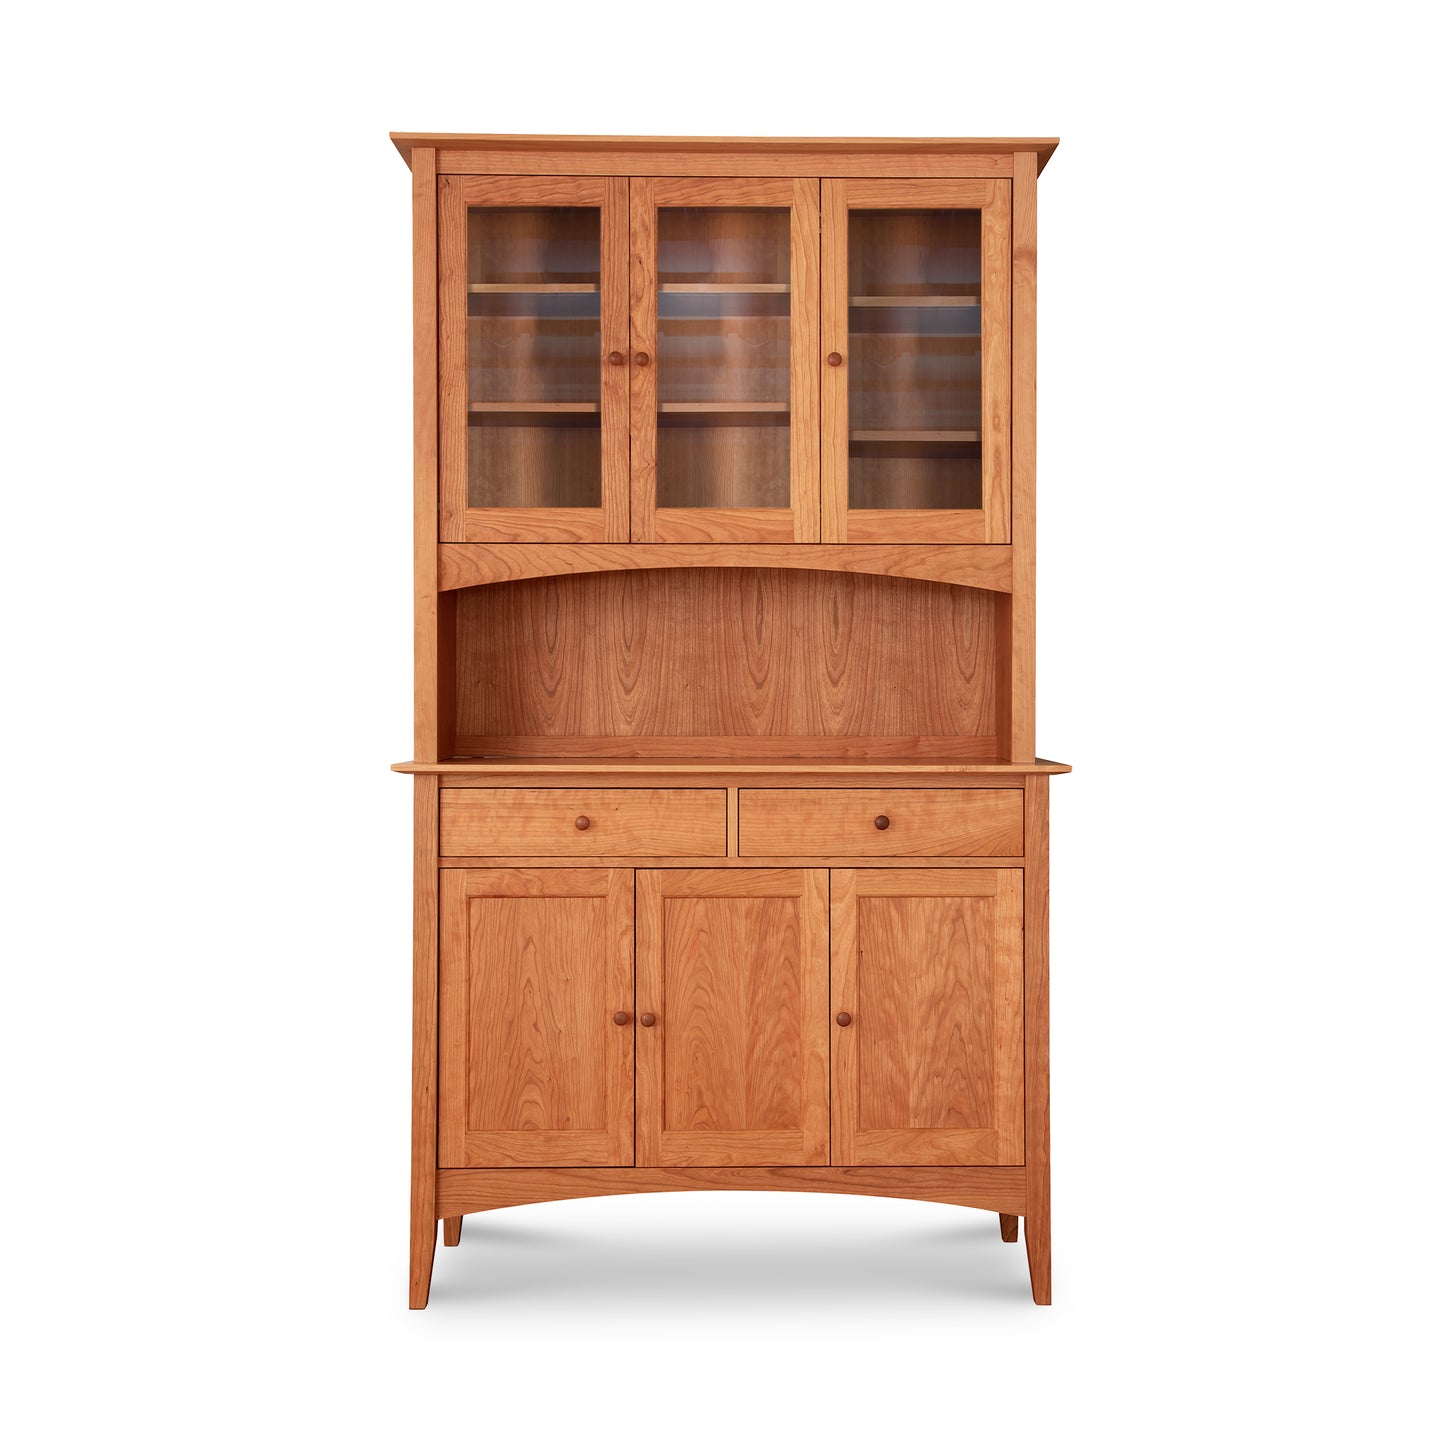 An American Shaker 50" China Cabinet by Maple Corner Woodworks made of natural hardwood with upper glass-fronted cabinets and lower enclosed storage on a white background.